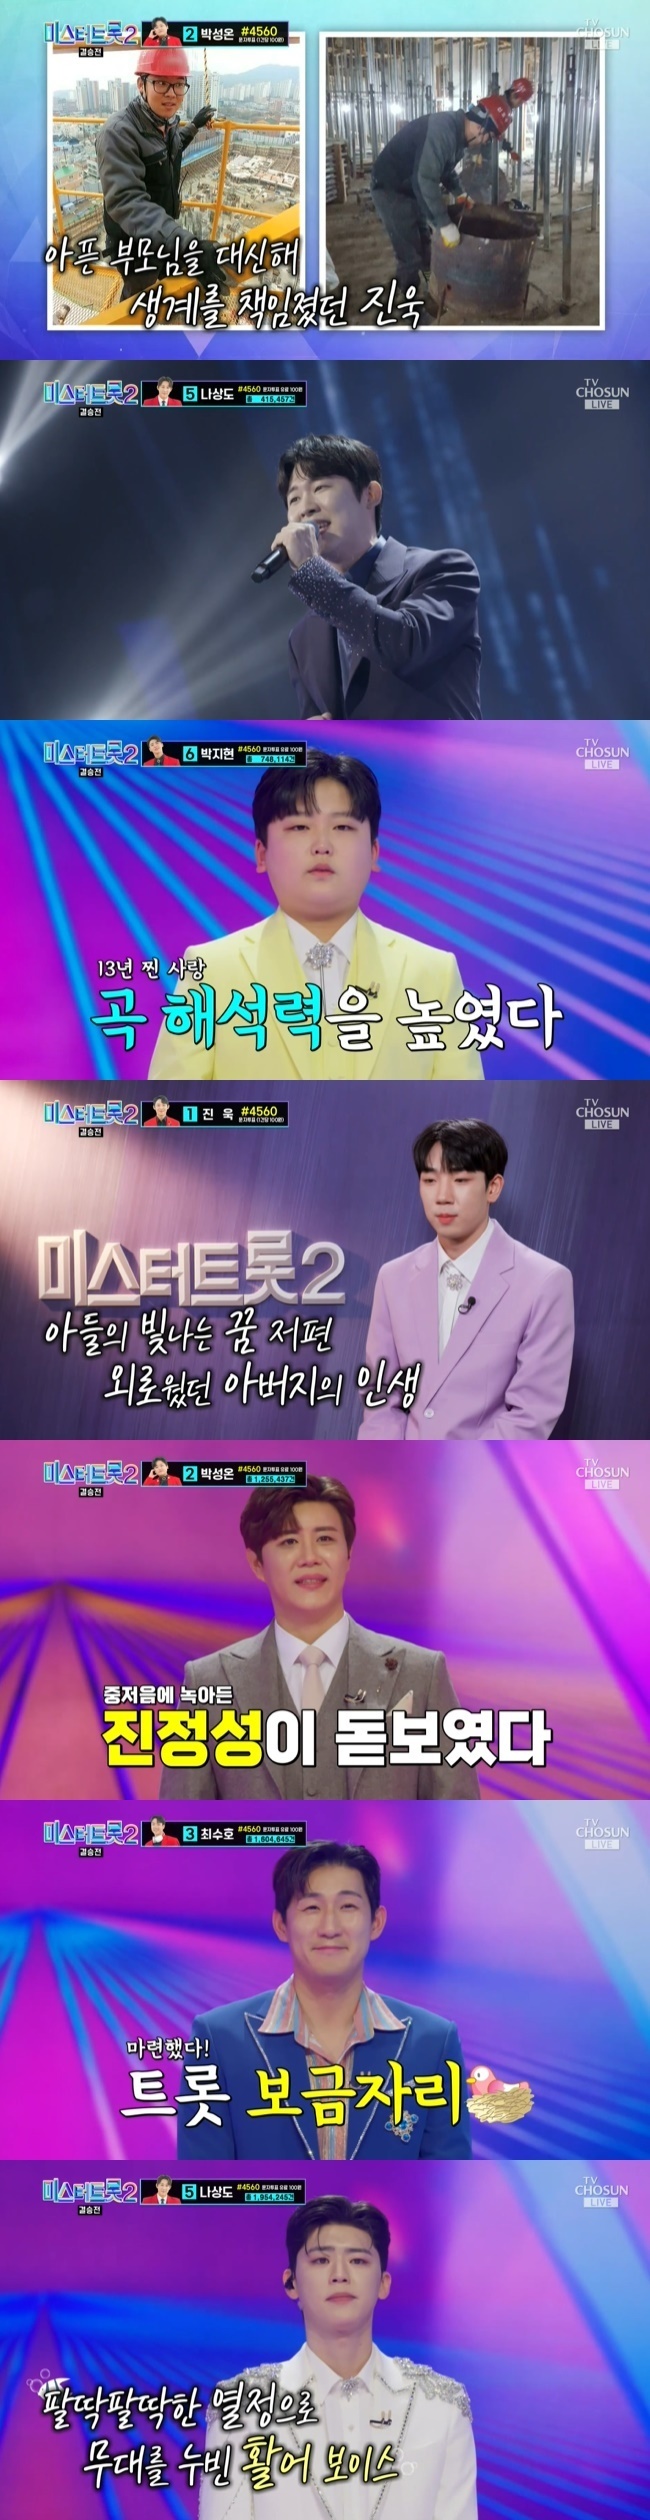 Safety Lessons has been inducted into the  ⁇ Mr Trot2 ⁇  Jean.On March 16, TV Chosun  ⁇  Mr Trot2 - The beginning of a new legend, the final of TOP7 was held.The first stage of the finals, which was unfolded as a life song mission, was decorated by Jin-wook! Jin-wook!Selection of songs Jin-wook !, whose father cried during his obscurity at the meeting, revealed the story of his mothers illness and fathers cancer, which forced him to work part-time instead of his activities.Jin-wook! I set up a stage for my self-defeating father, saying that he was lamenting that he could not see the light because he was not successful.In the acclaim of The Masters, Jin-wook! Received a high point of 100 and a lowest point of 92.Yonja Kim is a genius. There is nothing to say, he said. It is so good.I would like to thank you for giving me such a wonderful talent, and Jang Yun-jeong also thought that Sung-on would sing this song best in Korea.Starting with 119 people, Sung-on praised the stage as the best ever, and Park Sung-on received a high point of 100 points and a lowest point of 90 points.Choi su-ho chose the song of his fathers favorite song, Hyun-chul, and chose the song of your thoughts.Choi su-ho was born in Japan and came to Korea with the desire to learn Korean traditional music professionally in Korea. In the process, Father gave thanks to his father who sacrificed himself for almost 7 years because of me.Choi su-ho is an arrangement that stimulates emotions and reinterprets the song in a different atmosphere from the original.Choi su-ho received a high point of 100 points and a lowest point of 92 points, along with Jang Yun-jeongs comment that the strategy of subtracting power worked.Jinhae-seong came up to Seoul 10 years ago to become a trot singer, and when he thought that he had no stage and was alone, he sang Lee Jeong-oks crying sound.It turns out that the coma is a lonely but beautiful stage. Haesung is very attractive in the bass. When Haesung puts his heart into it, the upcoming emotions become infinite. This song was a beautiful stage that looked so good.Jinhae-seong received a high point of 100 points and a lowest point of 88 points.Na Sang-do confessed, This is my fifth audition so far, and my last audition in my life will be Mr Trot2, but I have not been able to become a singer yet.Na Sang-do, who judged that it is suitable for his clothes to be able to give pleasure and impression in rhythm, selected the  ⁇   ⁇   ⁇   ⁇  of Lim Young-woong and conveyed energy with cool technique and bright smile.Na Sang-do received a high point of 100 points and a lowest point of 94 points.Park Ji-hyun, who visited Mokpos home town and received family cheering, recalled the moment when he came to Seoul and felt that the weeds on the roadside were similar to his own situation.Yonja Kim said, Park Ji-hyun is not a live voice. It was as good as jumping on a board called Stage. Weeds seemed to be orchids.Park received a high point of 100 points and a lowest point of 95 points. Safety lessons released the stage in the last order.Safety lessons gave up the singer for a living, and when I started the Jumeok-bap business, I remembered the fans who came to me without forgetting and chose the selection of my friends.Safety lessons stimulated audiences lacrimal glands with emotional tones and cool treble.Jang Yun-jeong thinks that it is more important not to have a big disadvantage than to have a big advantage. Safety lessons have no disadvantages, but it is scary that they are full of advantages.I think I told you that Safety lessons seem to be Season 2.Safety lessons surprised everyone with a high point of 100 and a lowest point of 97.After the special stage of Song Gain, Kim Ho-jung, Kim Yong profile and Choi Baek-ho was released, the finale ranking of TOP7 was revealed.The Master total score, online Cheering Voting, and real-time SMS Voting combined results 7th place is Park Sung-on, 6th is Jin-wook!, 5th is choi su-ho, 4th is Na Sang-do, 3rd is jinhae-seong, 2nd is Park Ji-hyun and 1st is Safety lessons.Safety lessons conveyed Thank You to viewers, The Master, producers, and parents, and said, I will try my best to be a singer who can sometimes comfort and sometimes give happiness to many people with my small talent.Safety lessons, which received a prize money of 500 million won, said that they had never imagined it before, but they wanted to give their parents a good home.